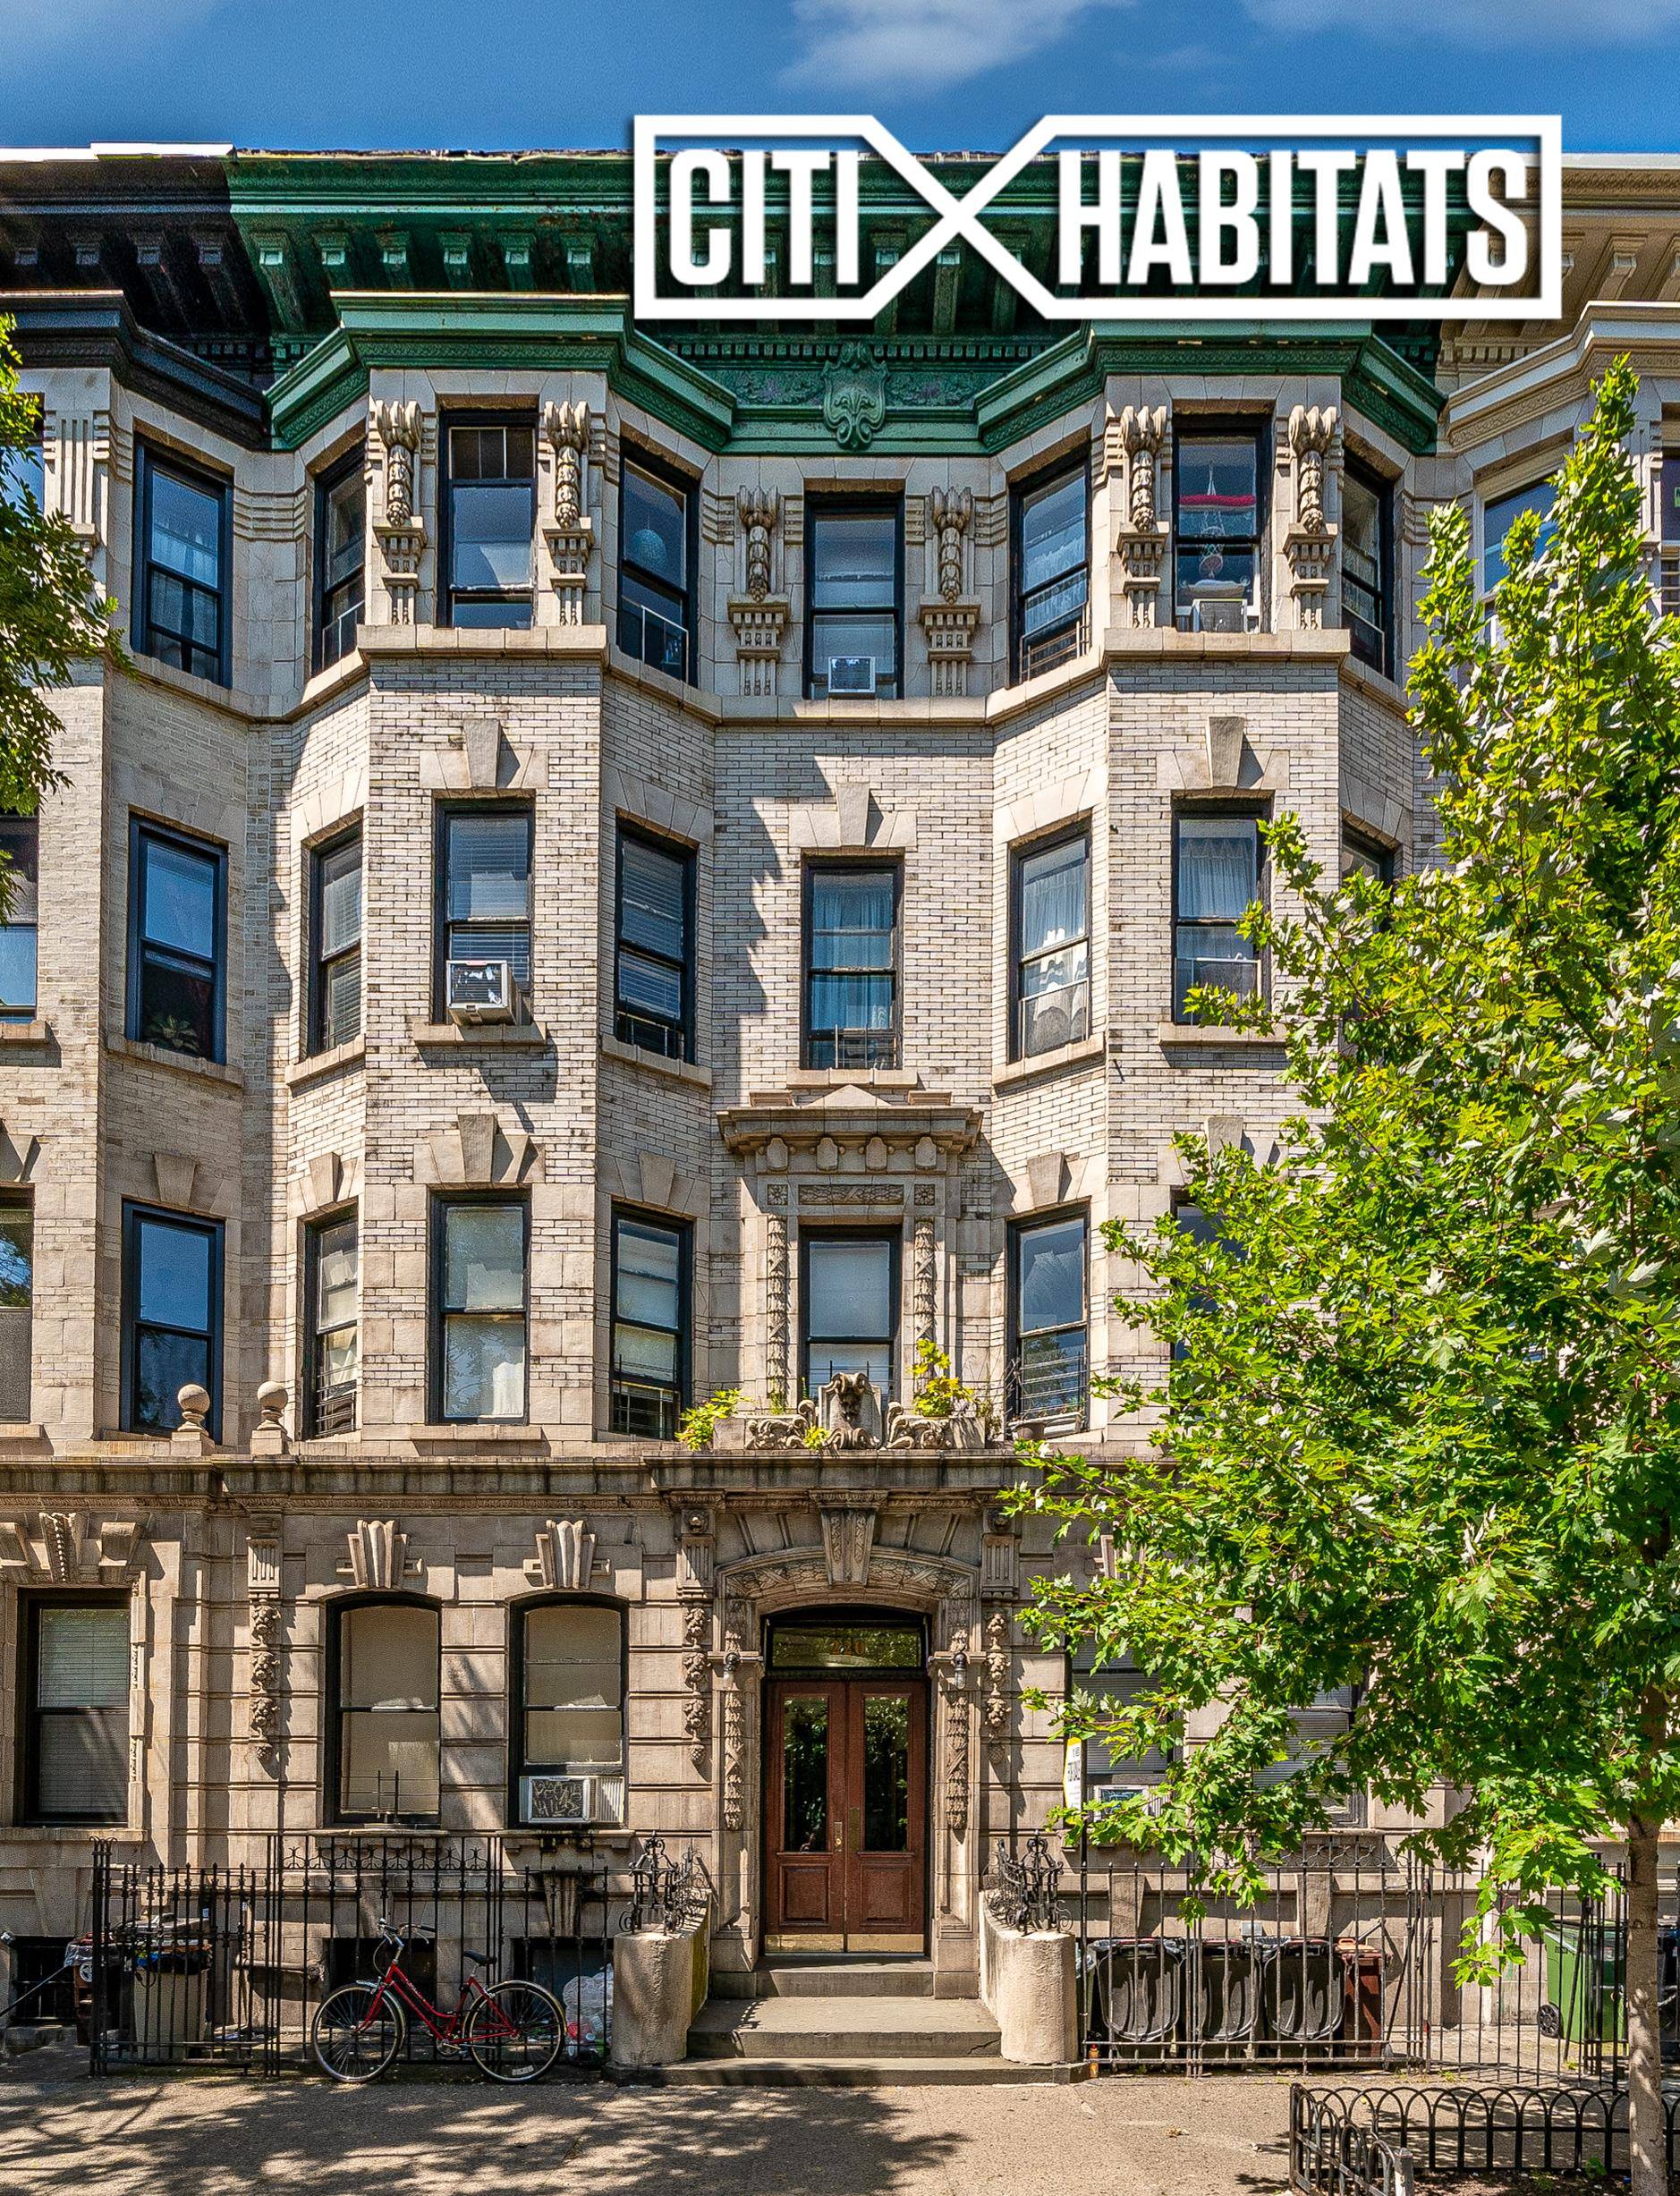 Create your own legacy with this circa 1920's 8 unit multi family building, located on a tree lined block in the Clinton Hill historic district.